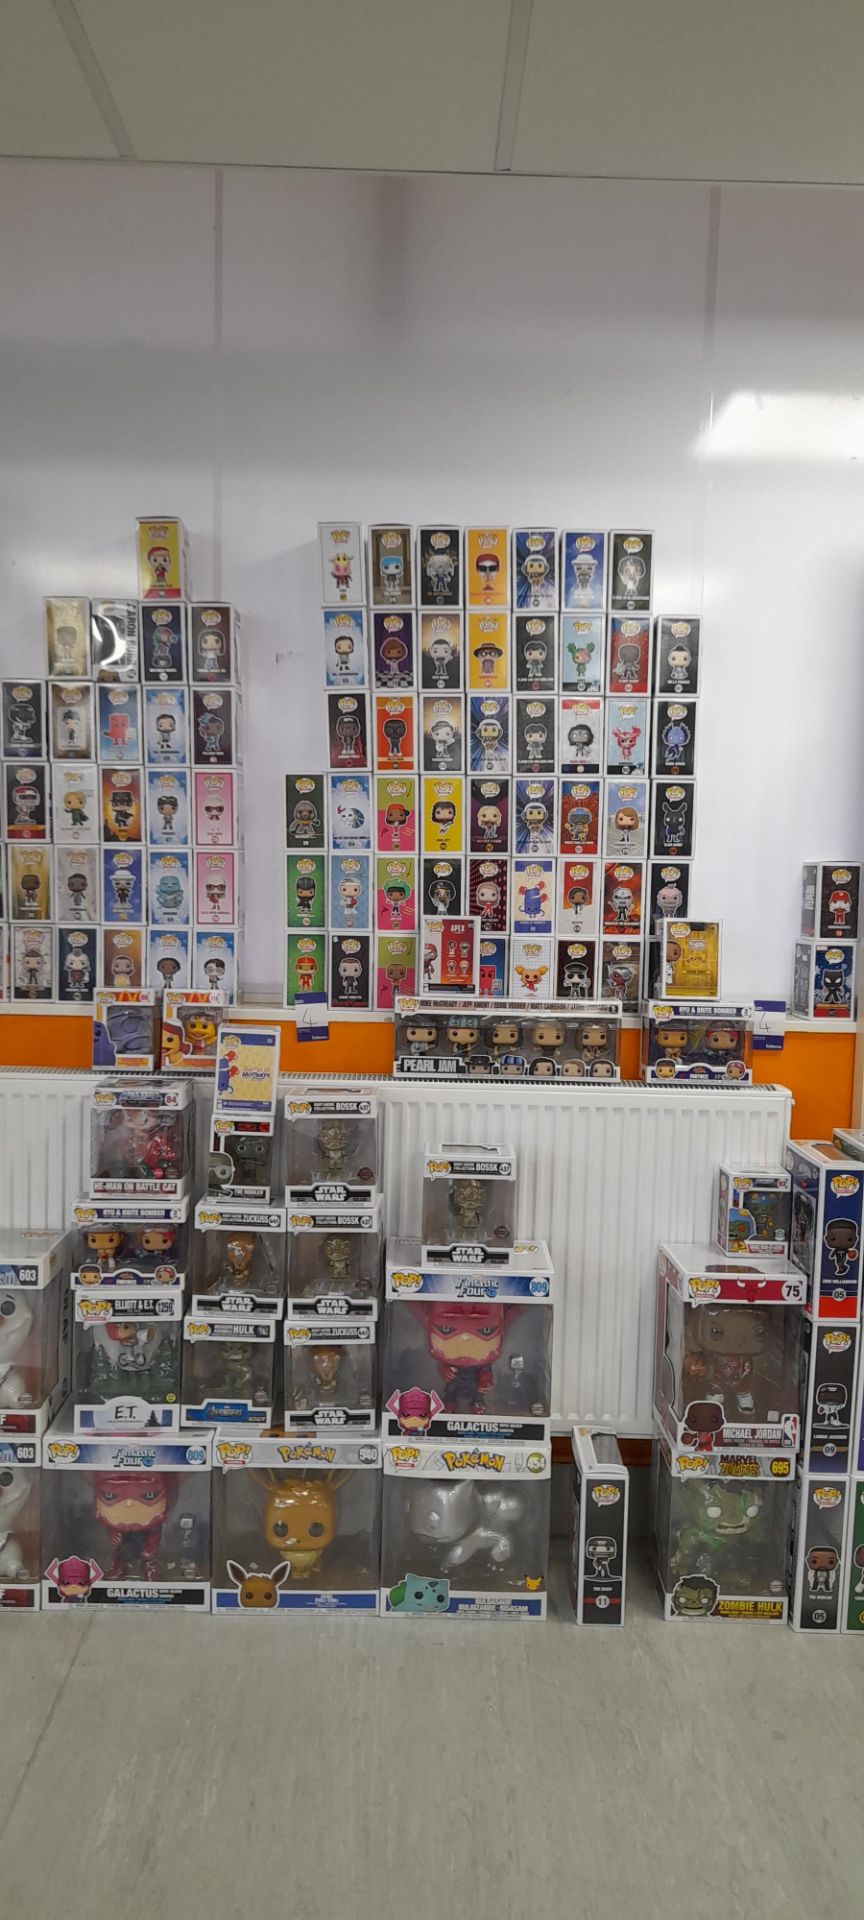 Quantity of Funko POP Collectables (Star Wars, Marvel, Heroes, TV etc.) to floor and wall